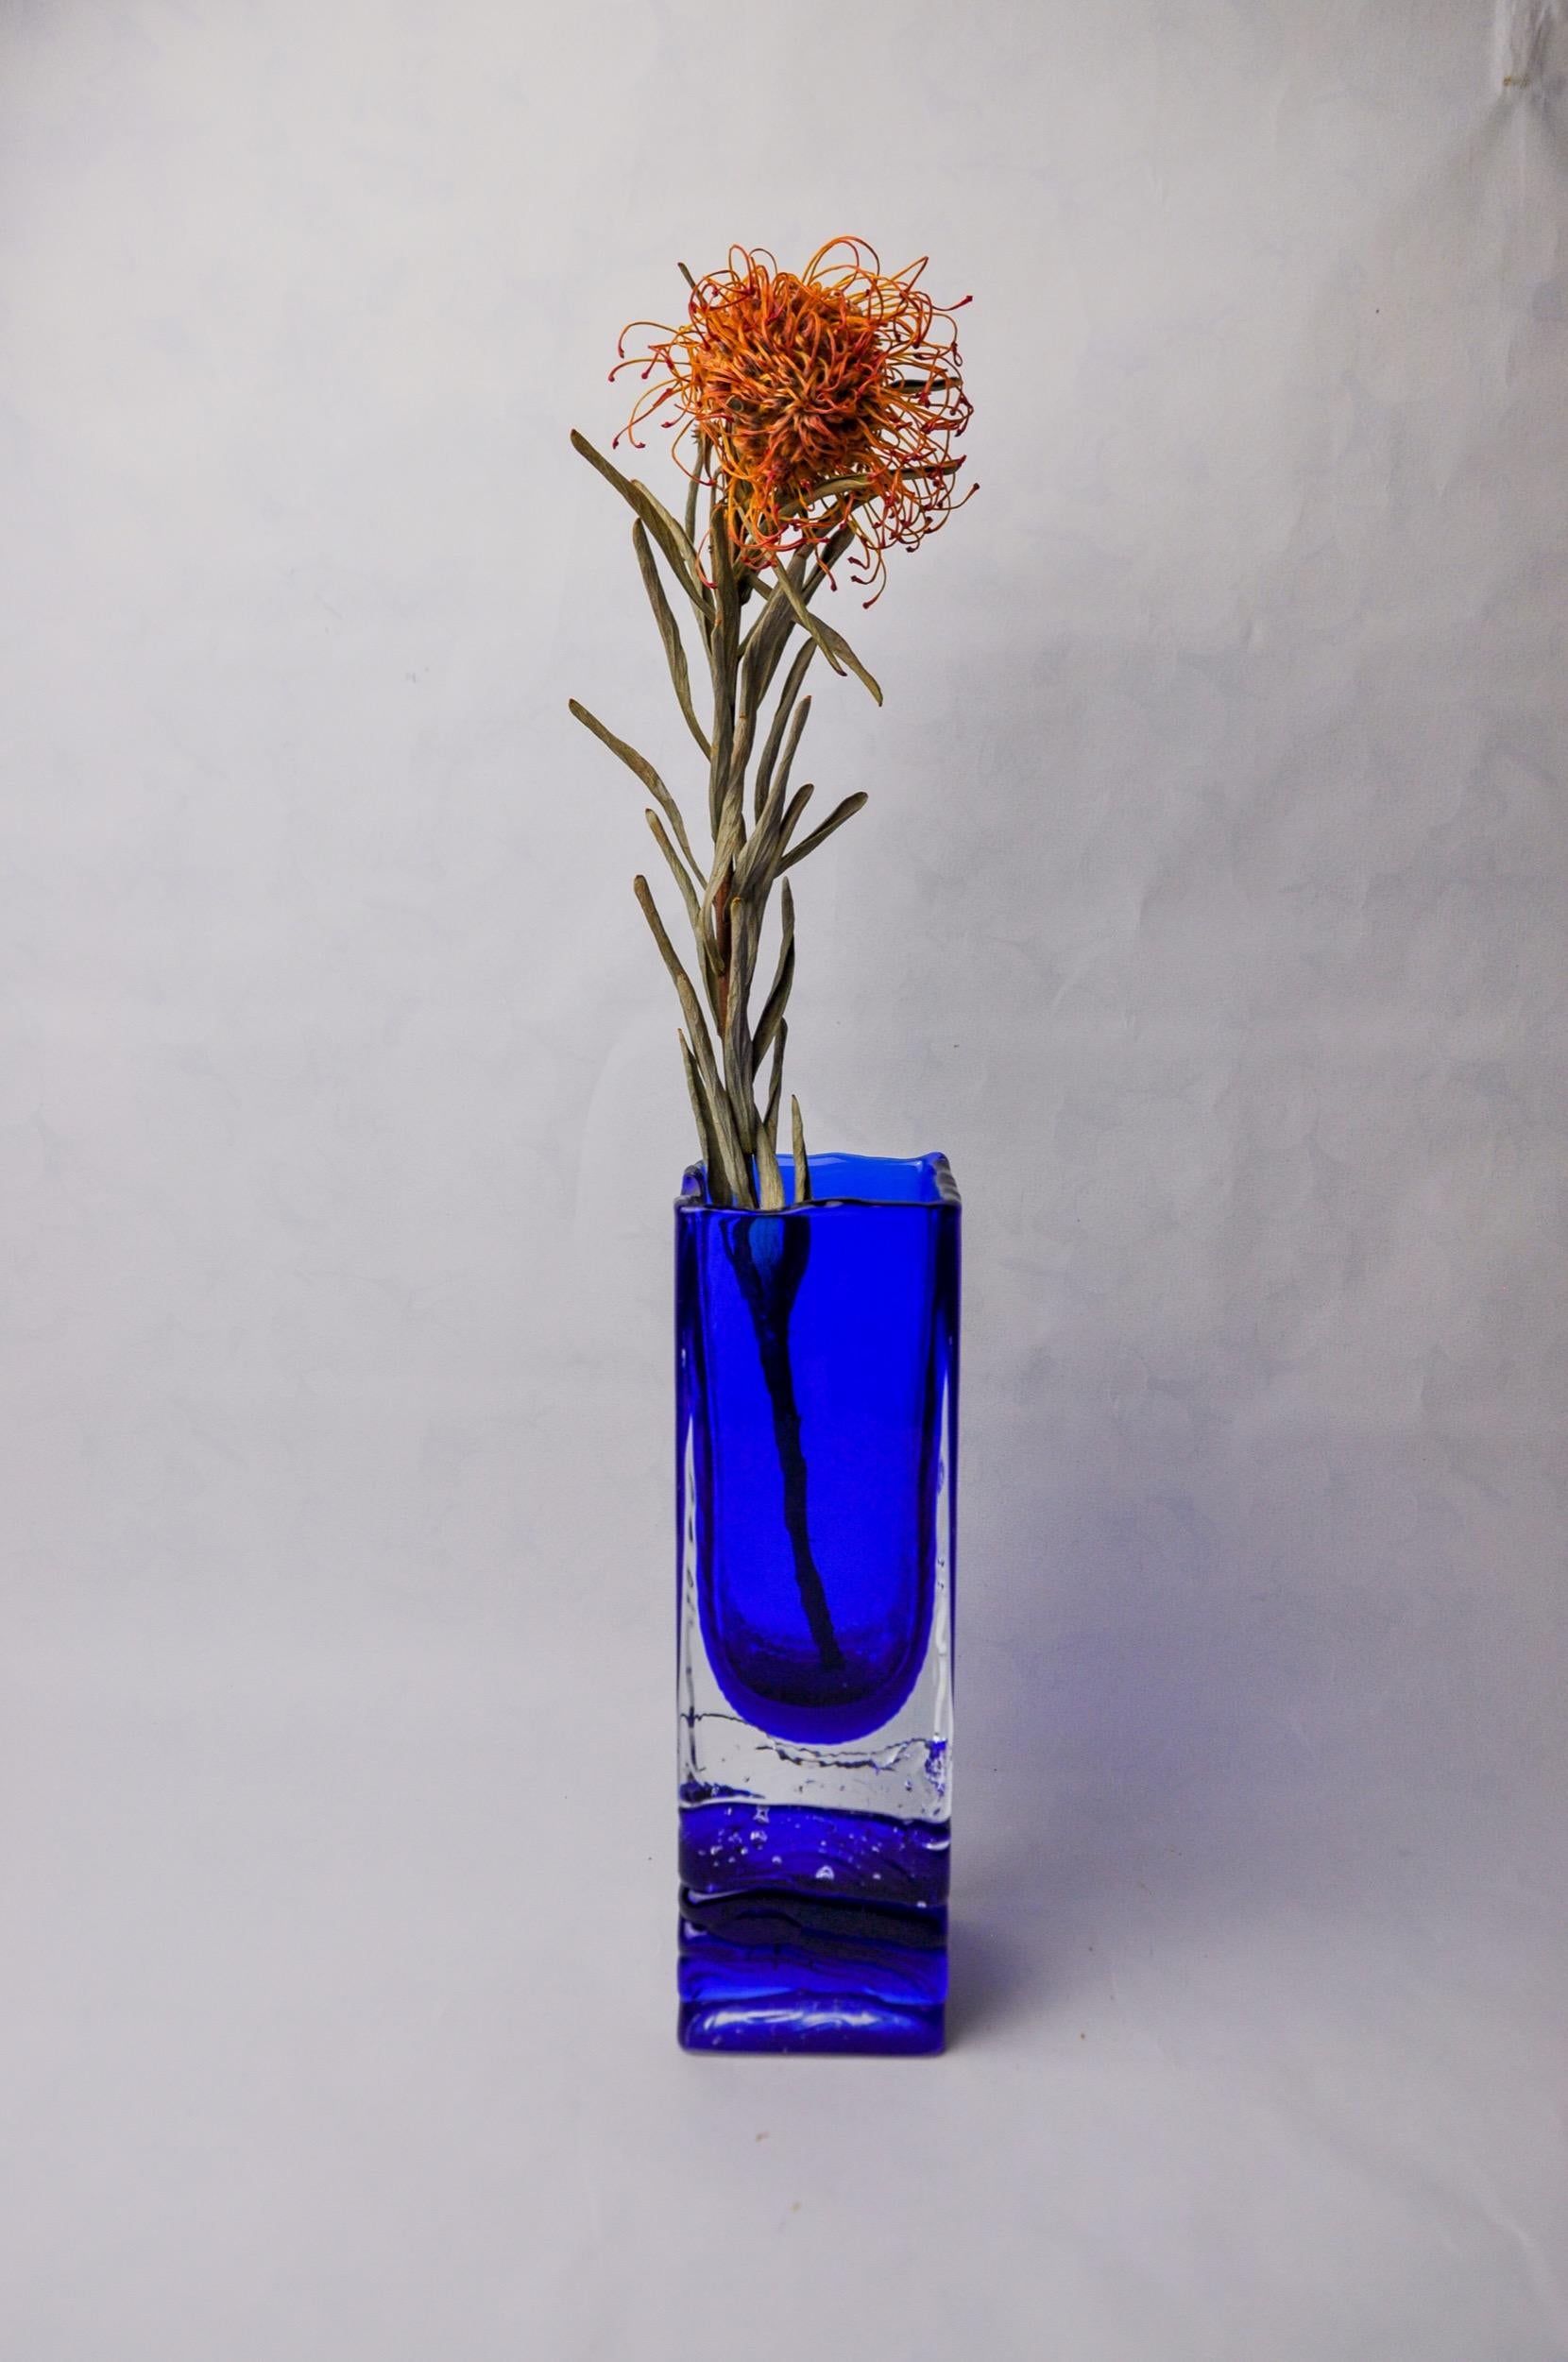 Superb Sommerso vase designed and produced by Petr Hora in the Czech Republic in the 1970s. Square blue glass vase handcrafted by the Czech artist using the 